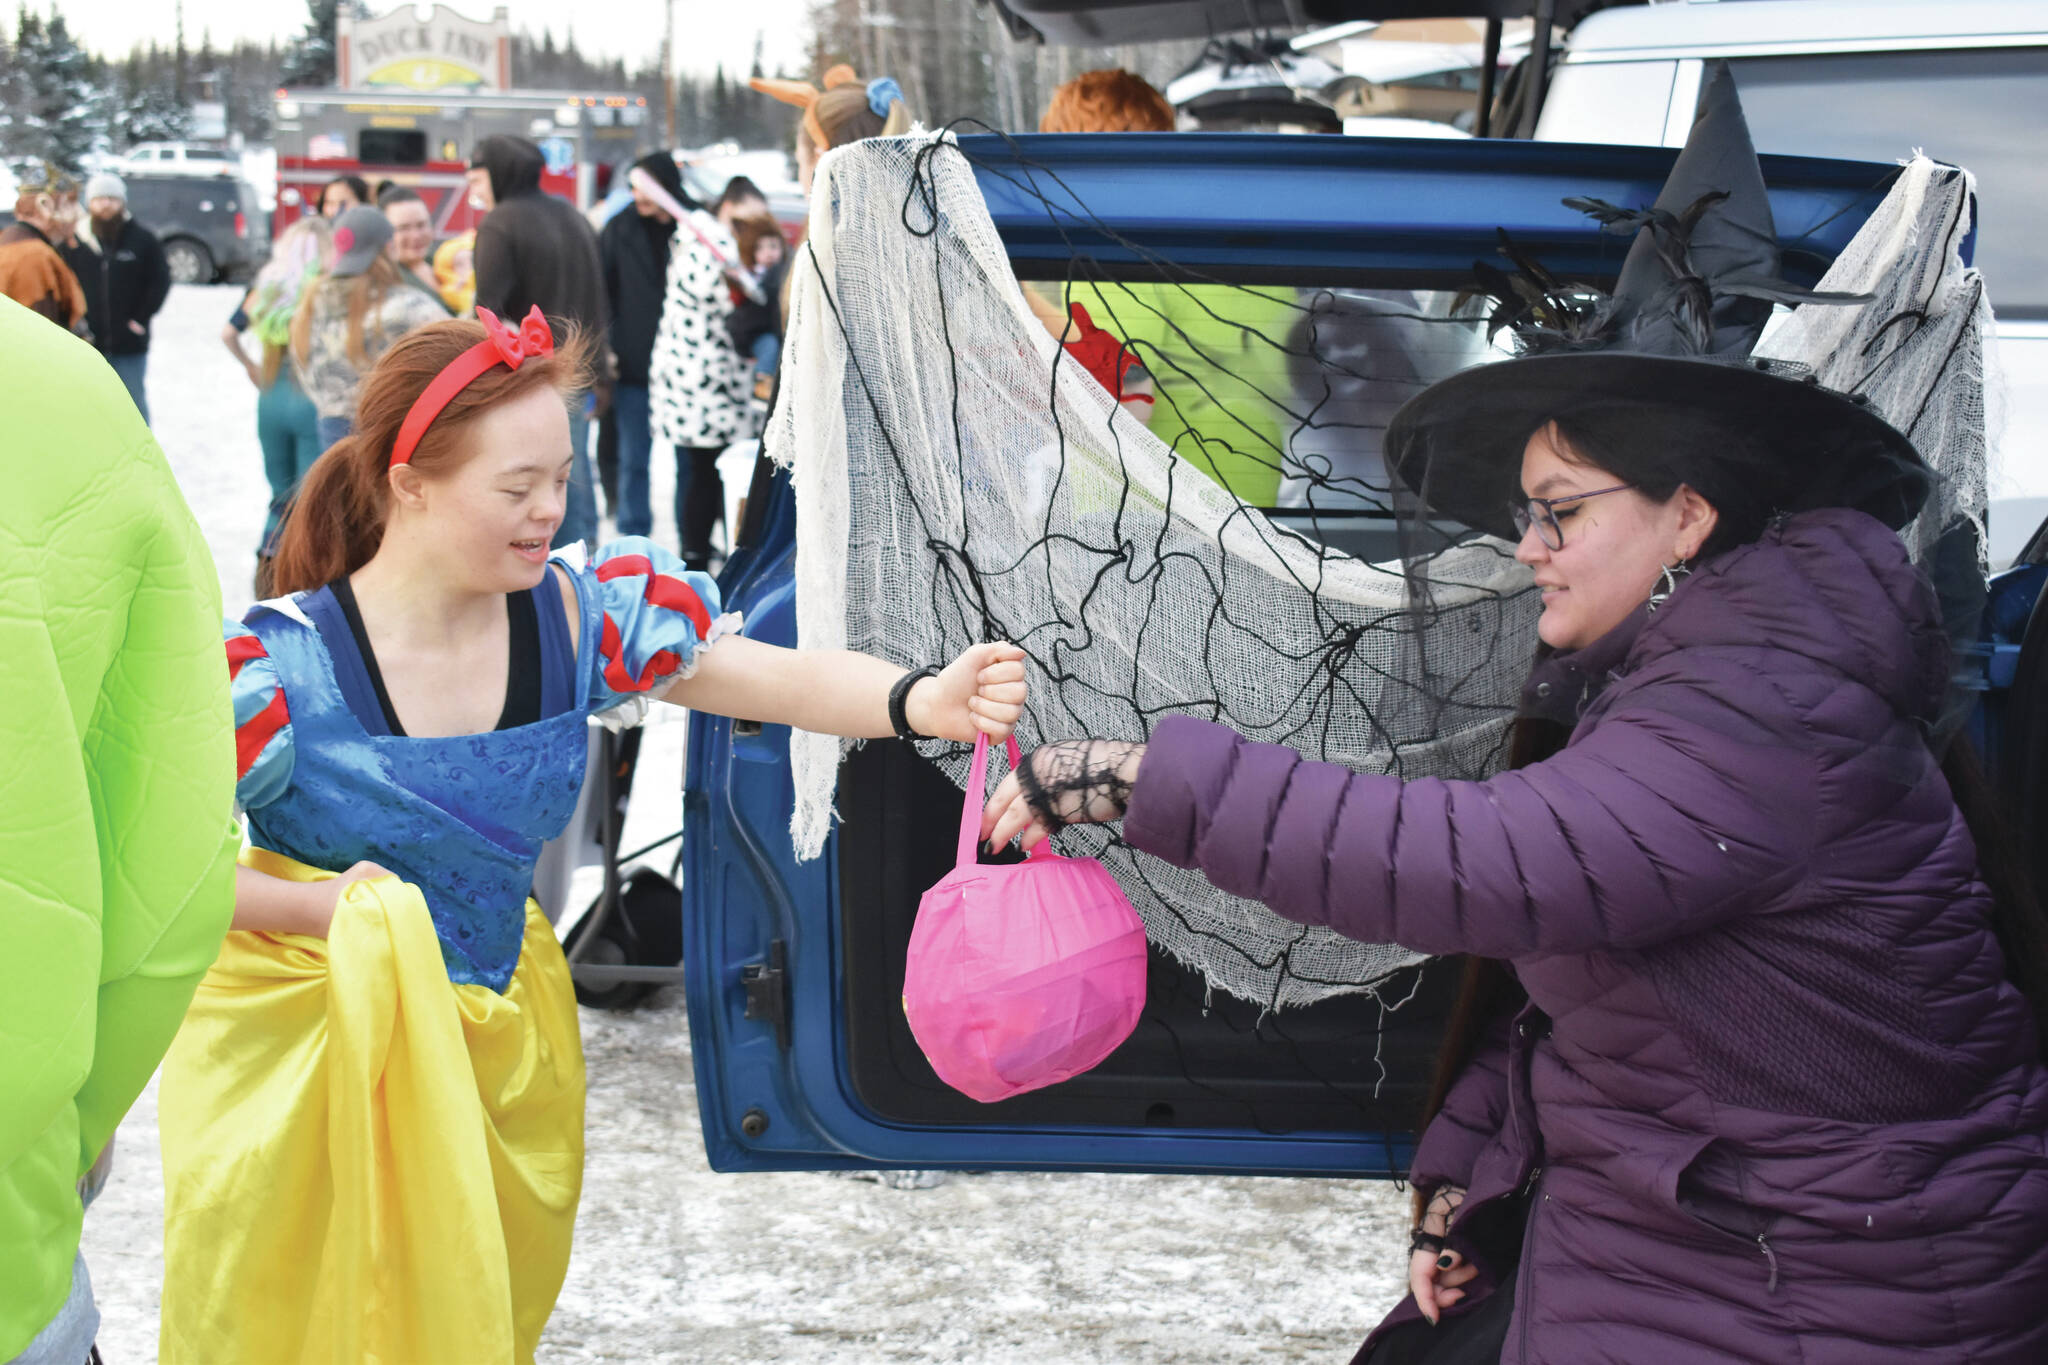 Jake Dye/Peninsula Clarion file
A girl dressed as Snow White takes candy from a witch at the Orca Theater’s Trunk or Treat in Soldotna on Monday, Oct. 31, 2022.